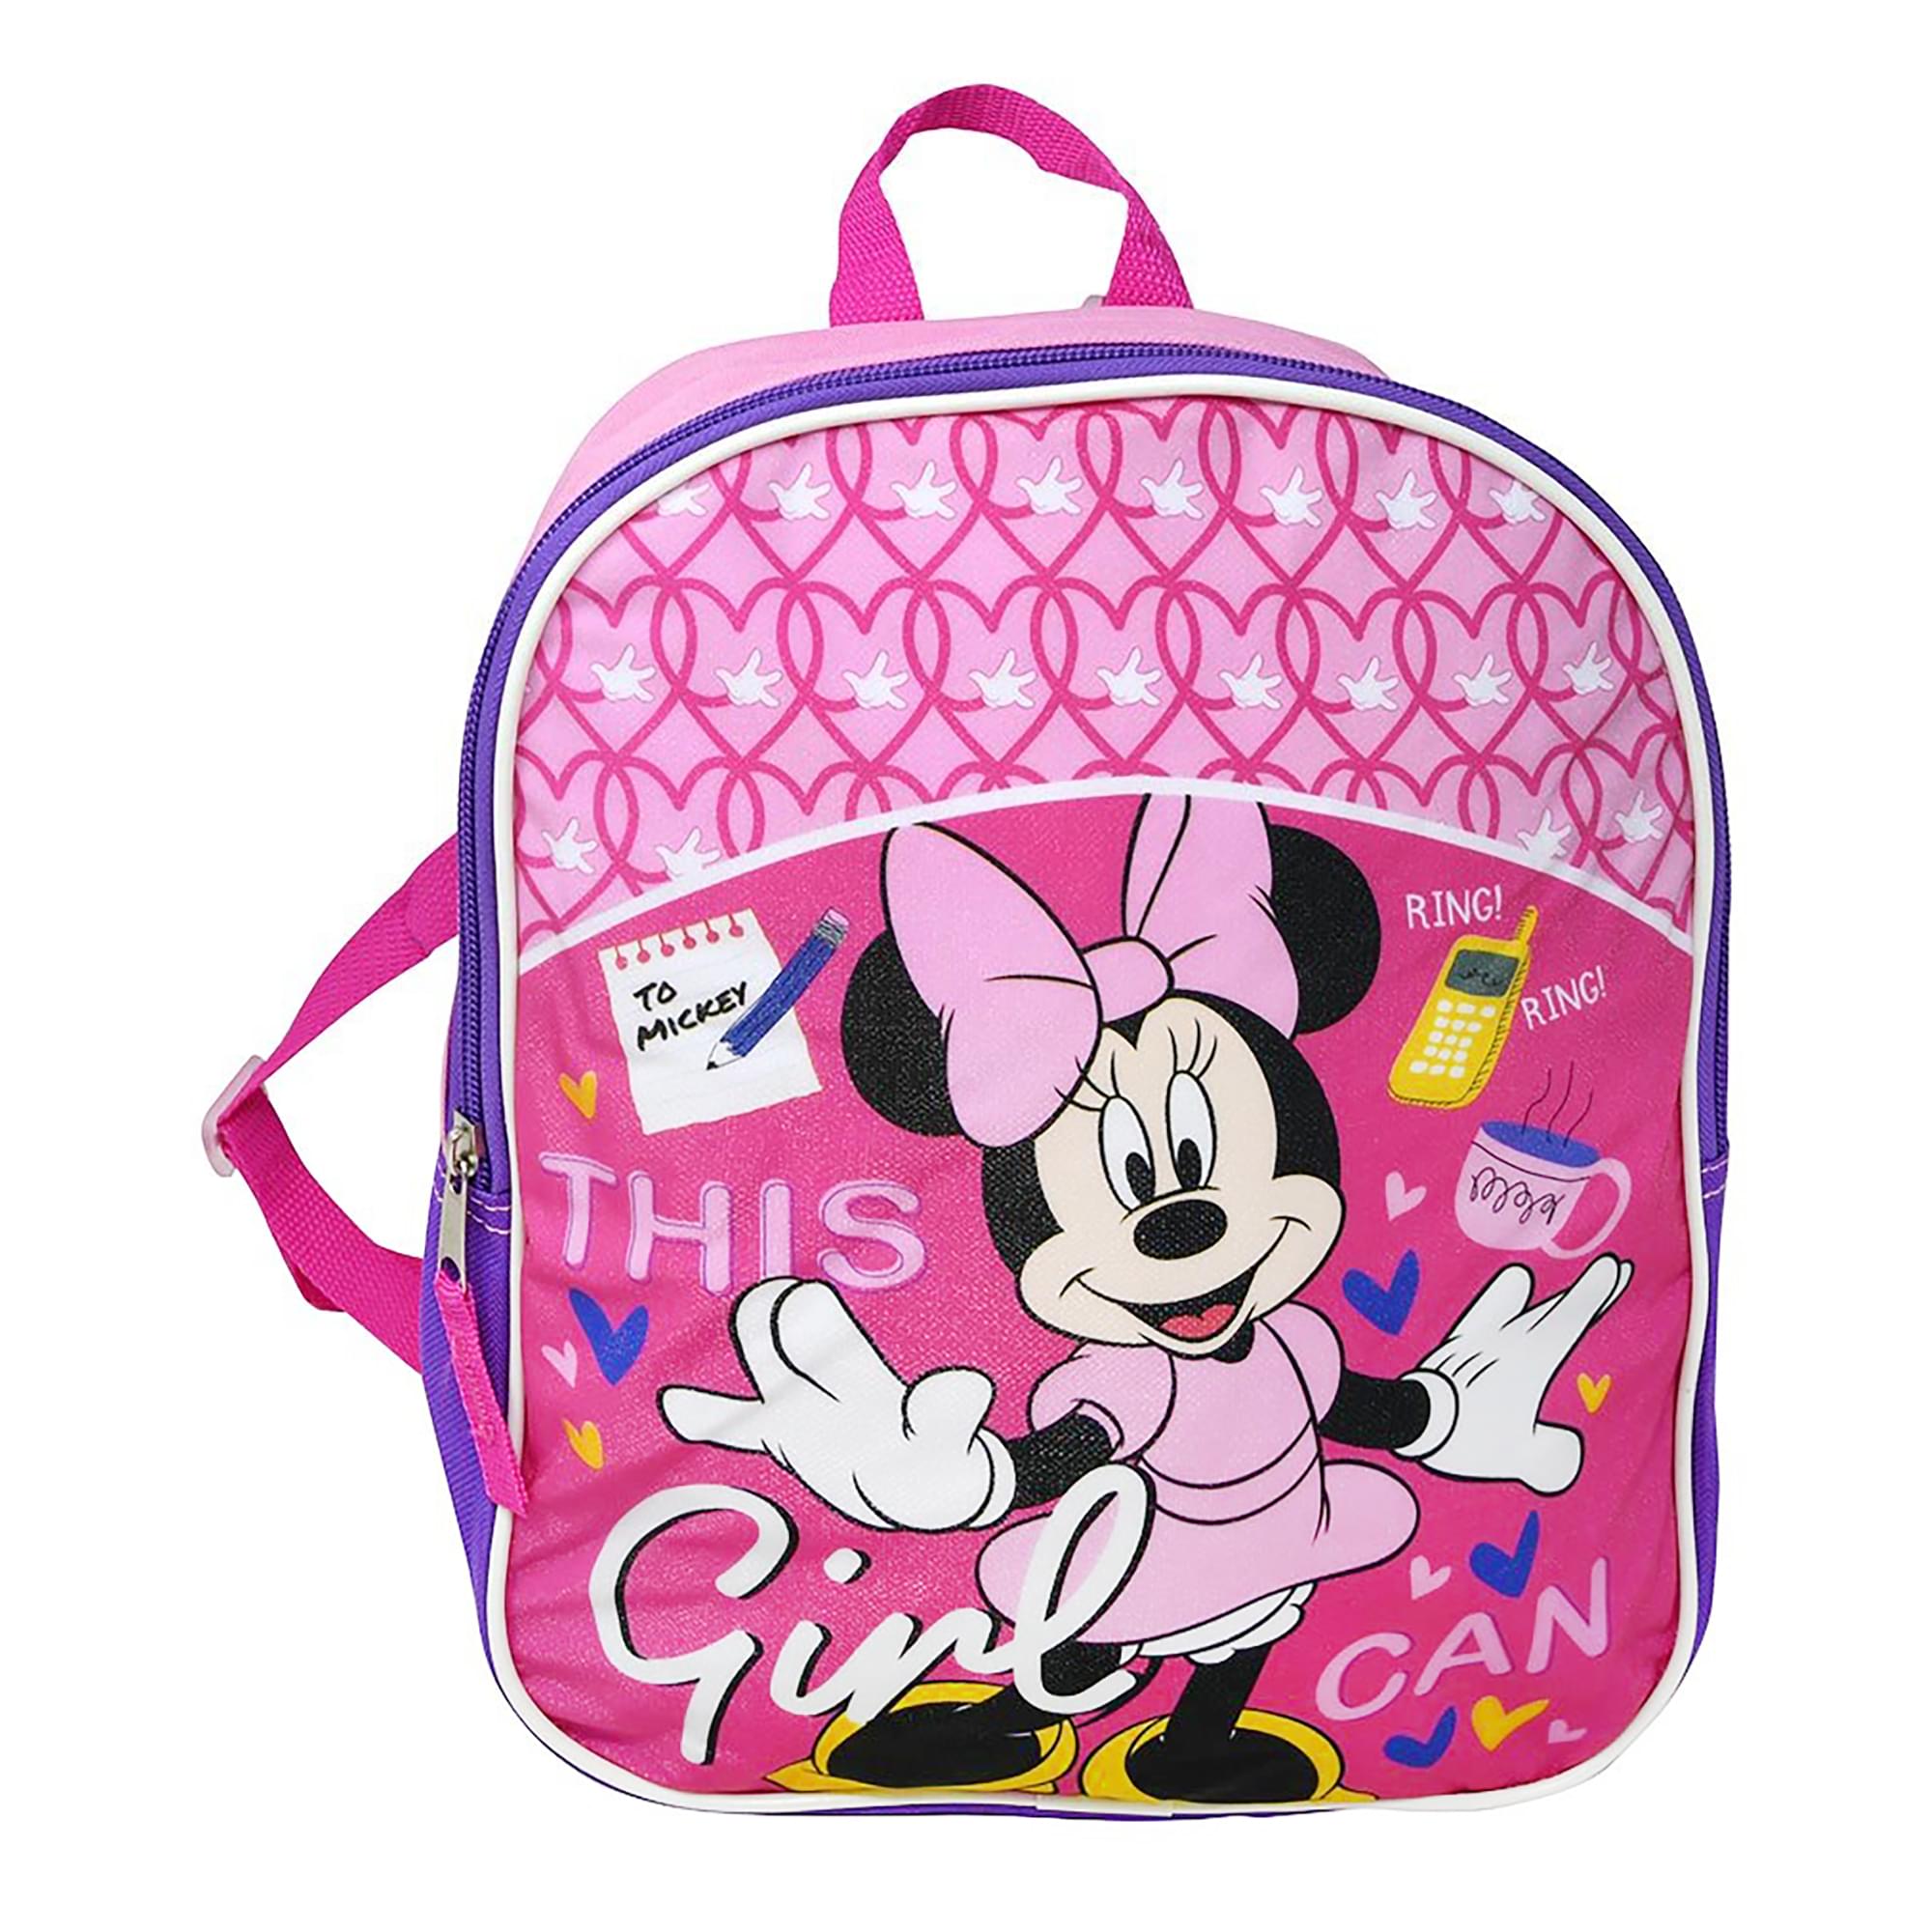 Disney Minnie Mouse Pink DIY Shoulder Bag Kit - Compare Prices & Where To  Buy 